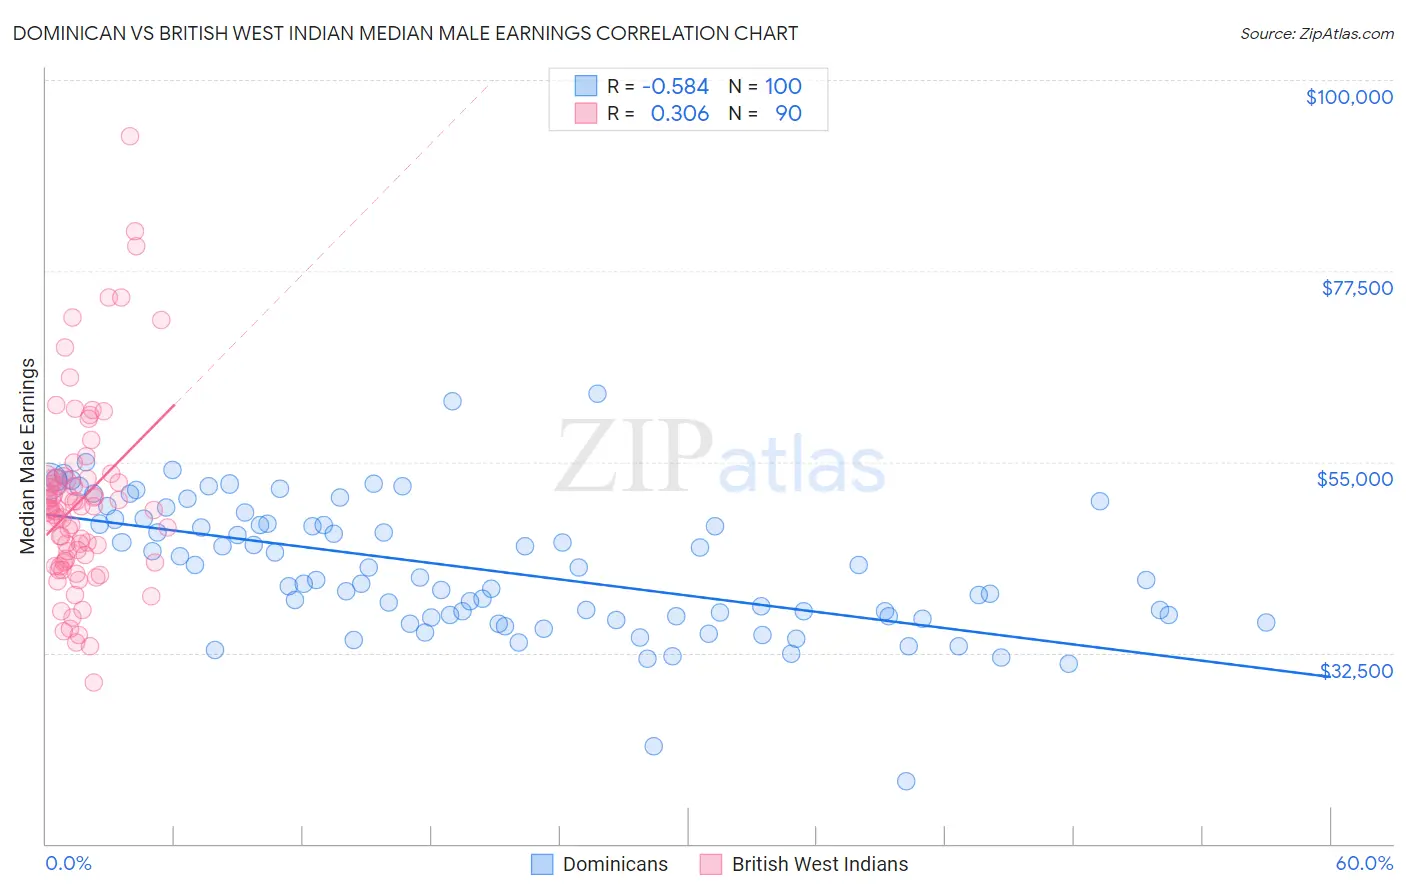 Dominican vs British West Indian Median Male Earnings